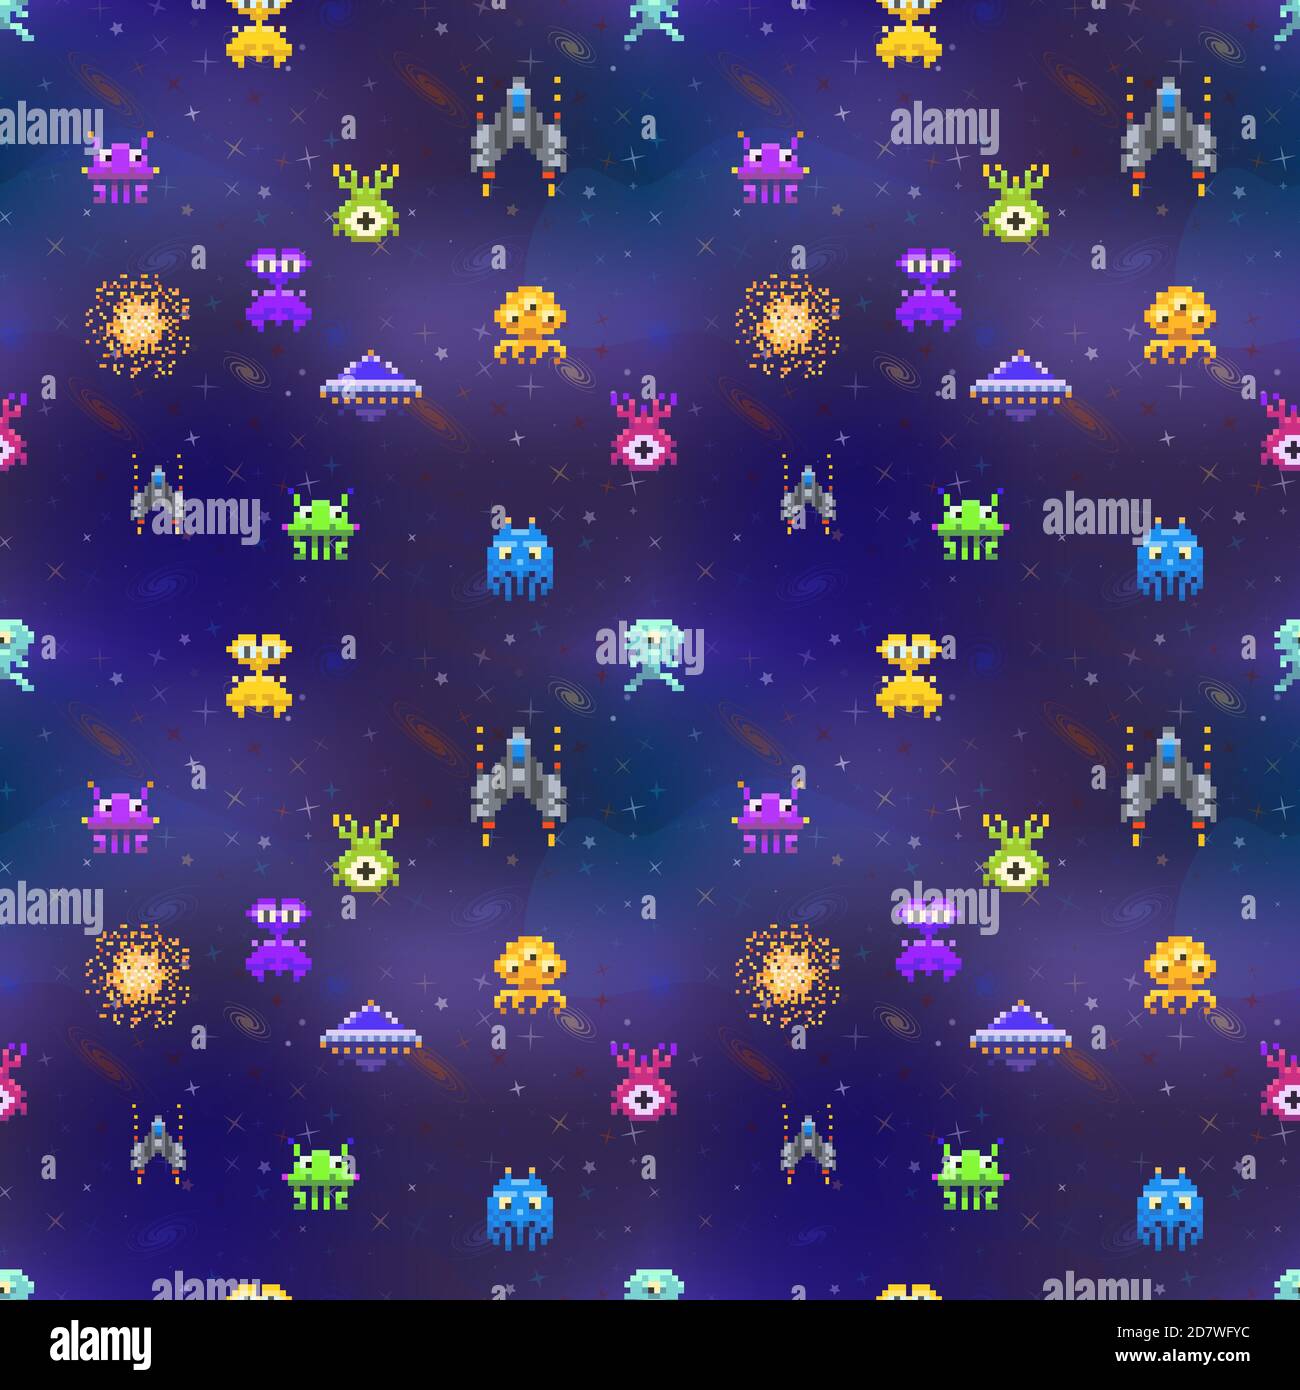 Cute space invaders in pixel art style on deep space background, seamless pattern Stock Vector